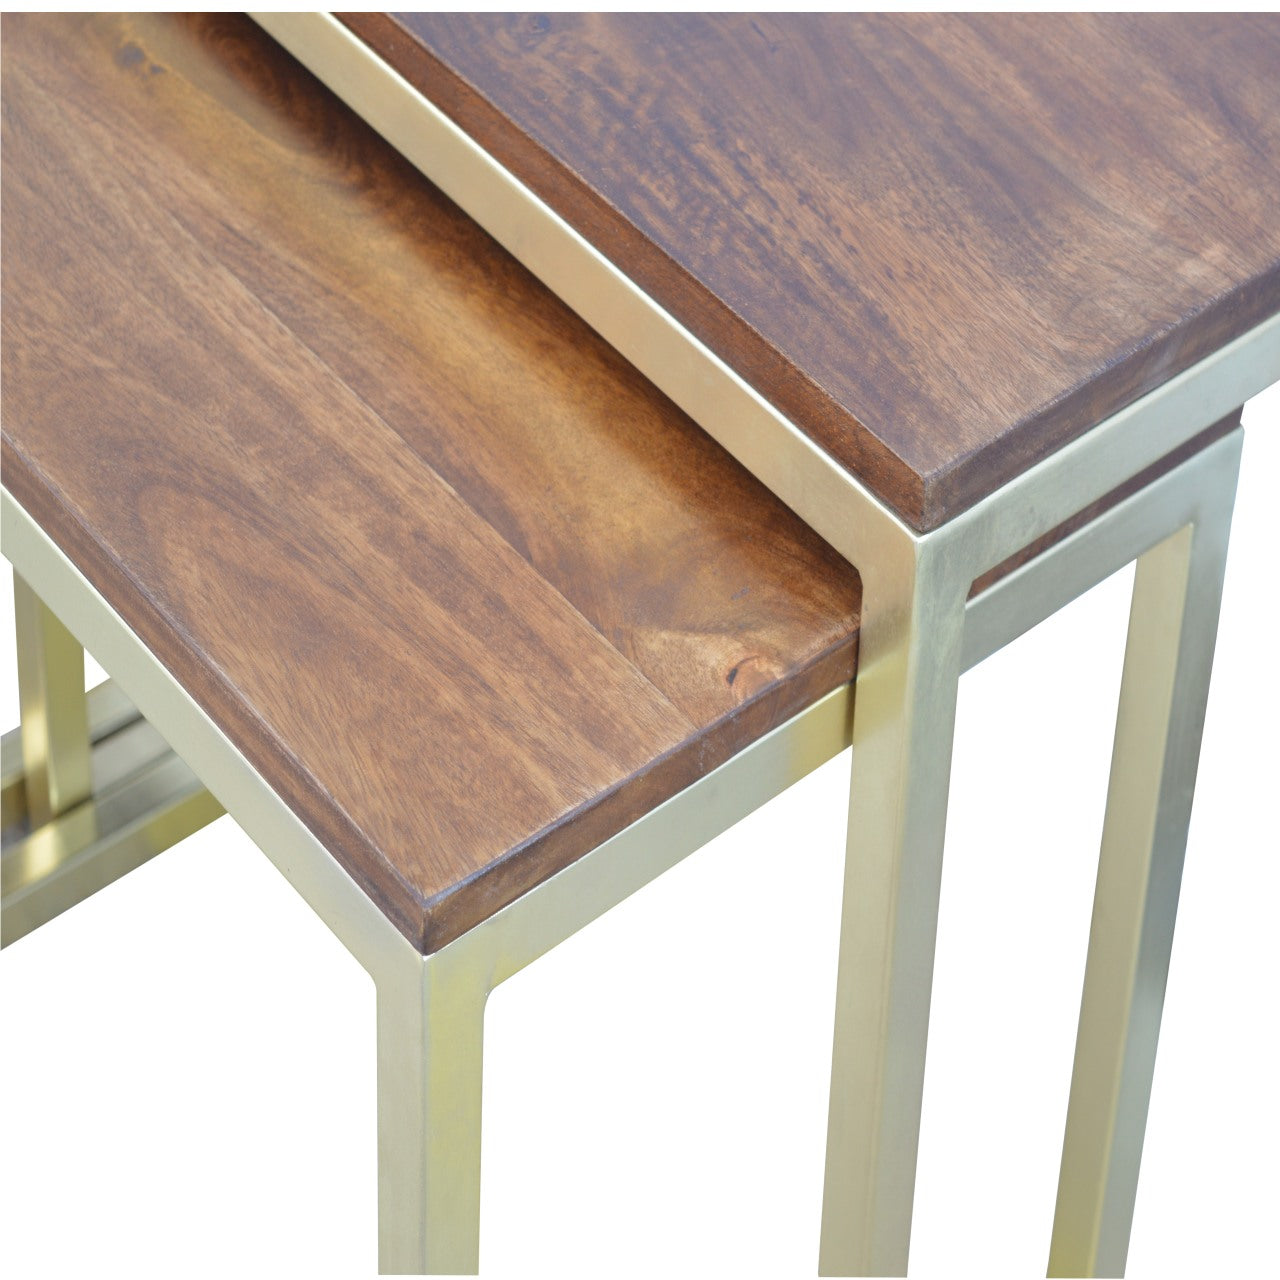 Set of 3 nesting tables with gold legs and wooden tops